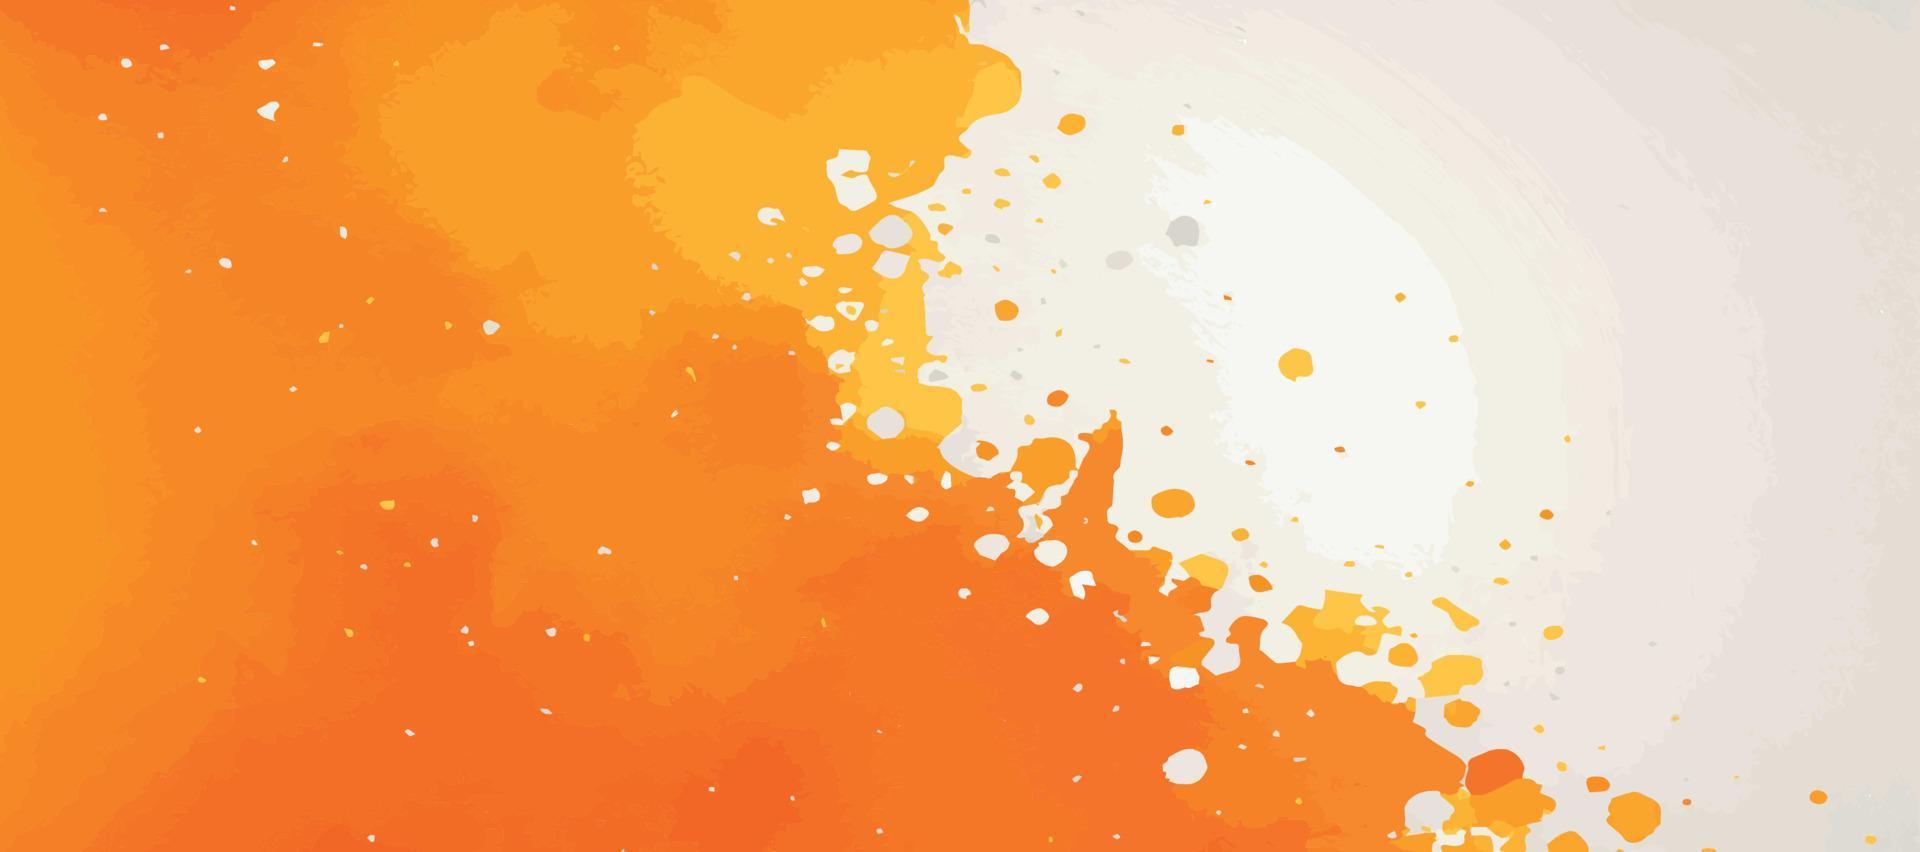 Realistic yellow-orange watercolor panoramic texture on a white background - Vector illustration